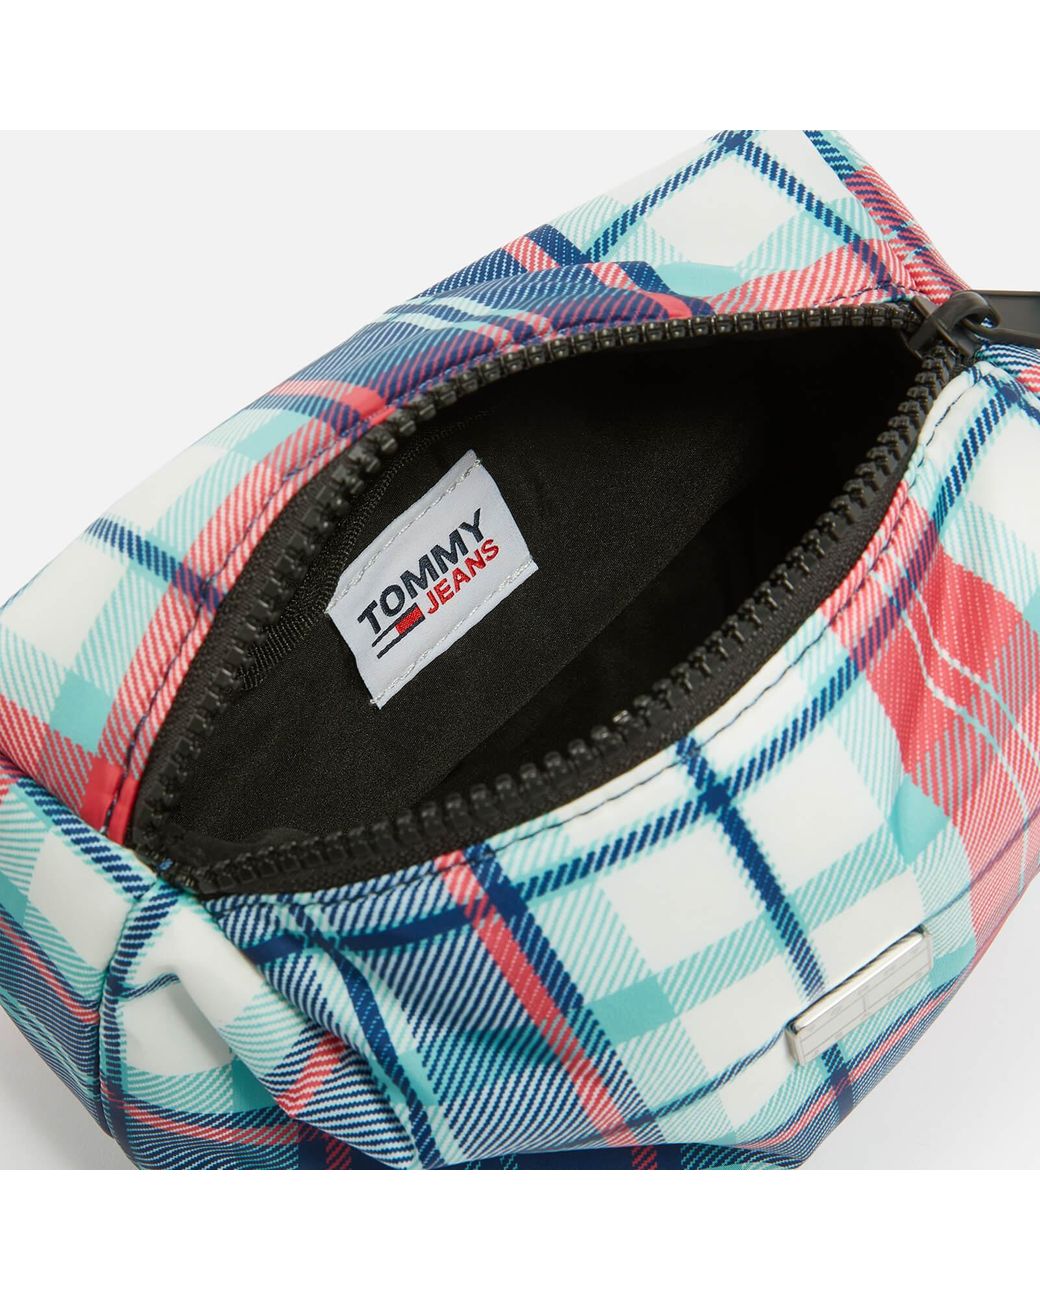 Tommy Hilfiger Conscious Tartan Shell Hype Vanity Bag in Blue | Lyst Canada